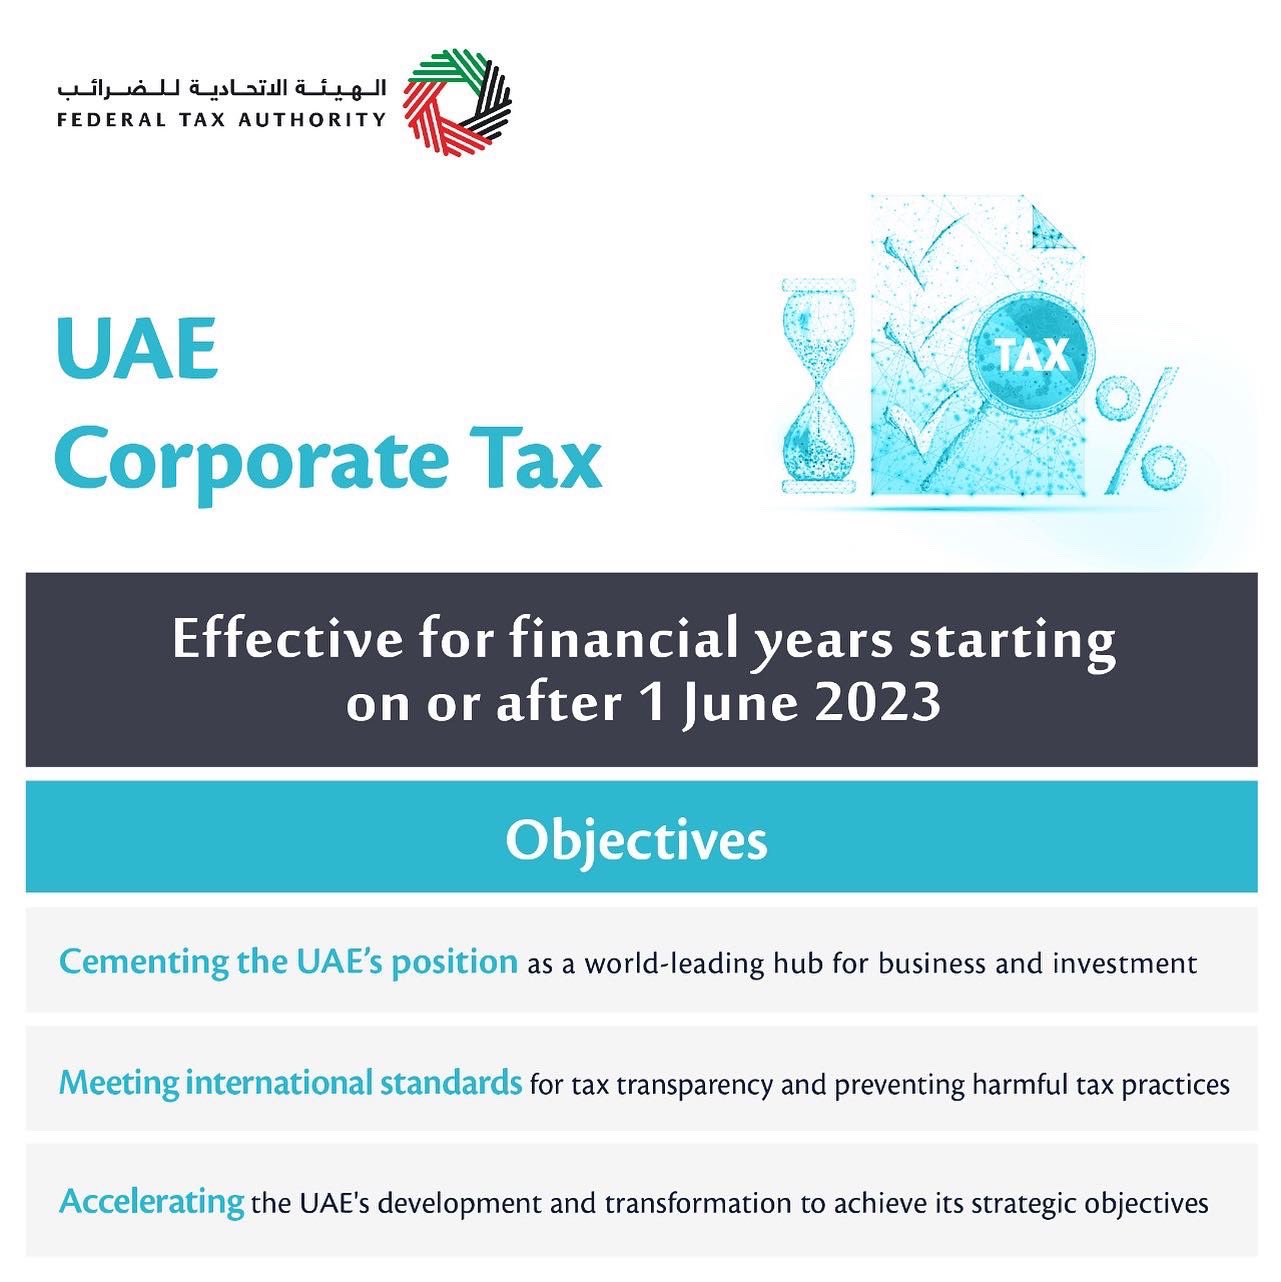 uae-to-introduce-federal-corporate-tax-from-june-2023-by-efficient-cfo